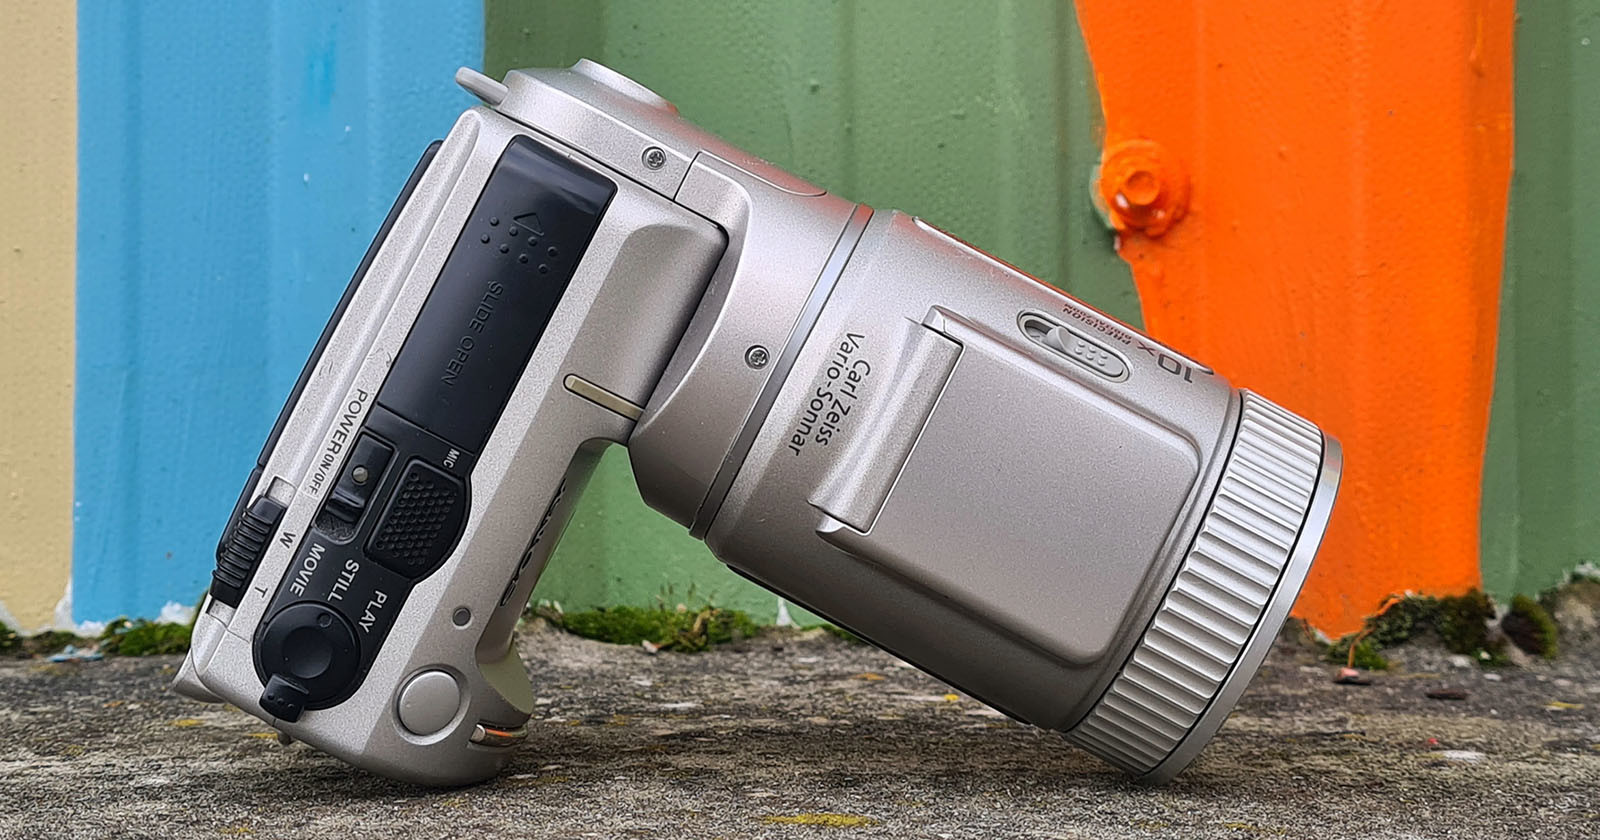  sony cyber-shot f505 remains clever camera years later 